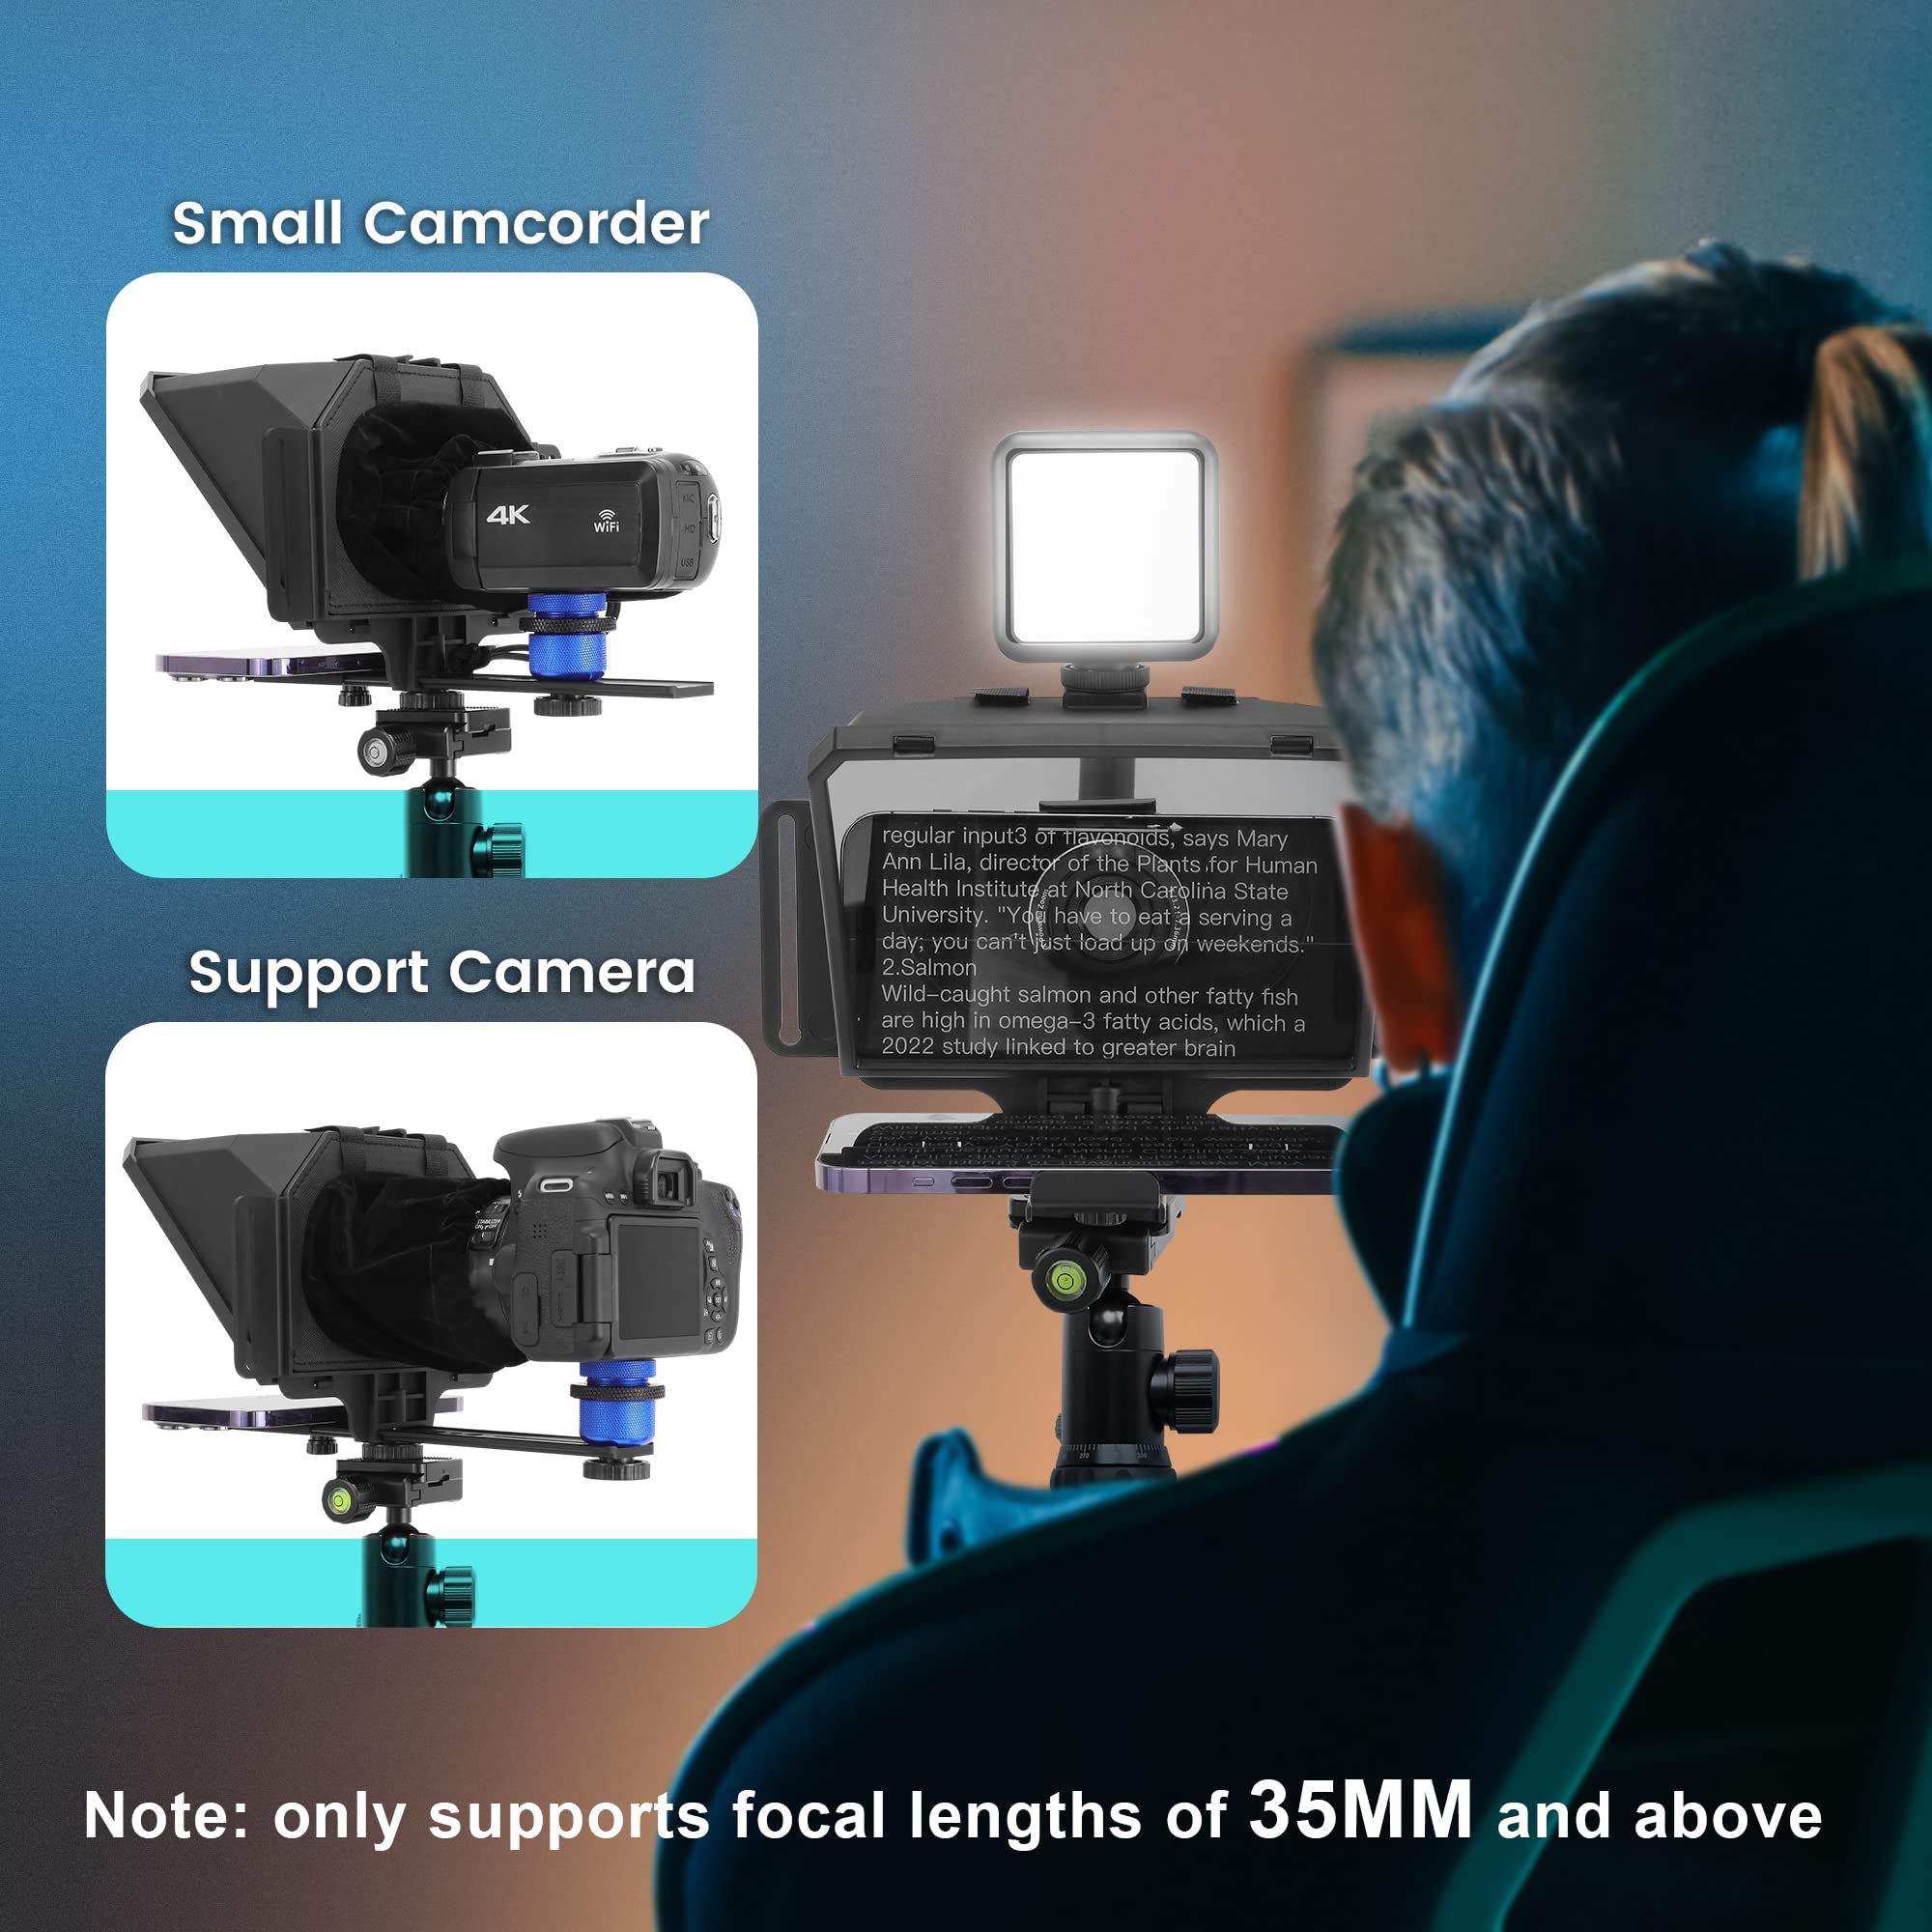 ILOKNZI 7.7 inch Phone Teleprompter Kit Bluetooth Remote Control and Tempered Optical Glass for Smartphone and Camera, iOS/Android Compatible S-Teleprompter App